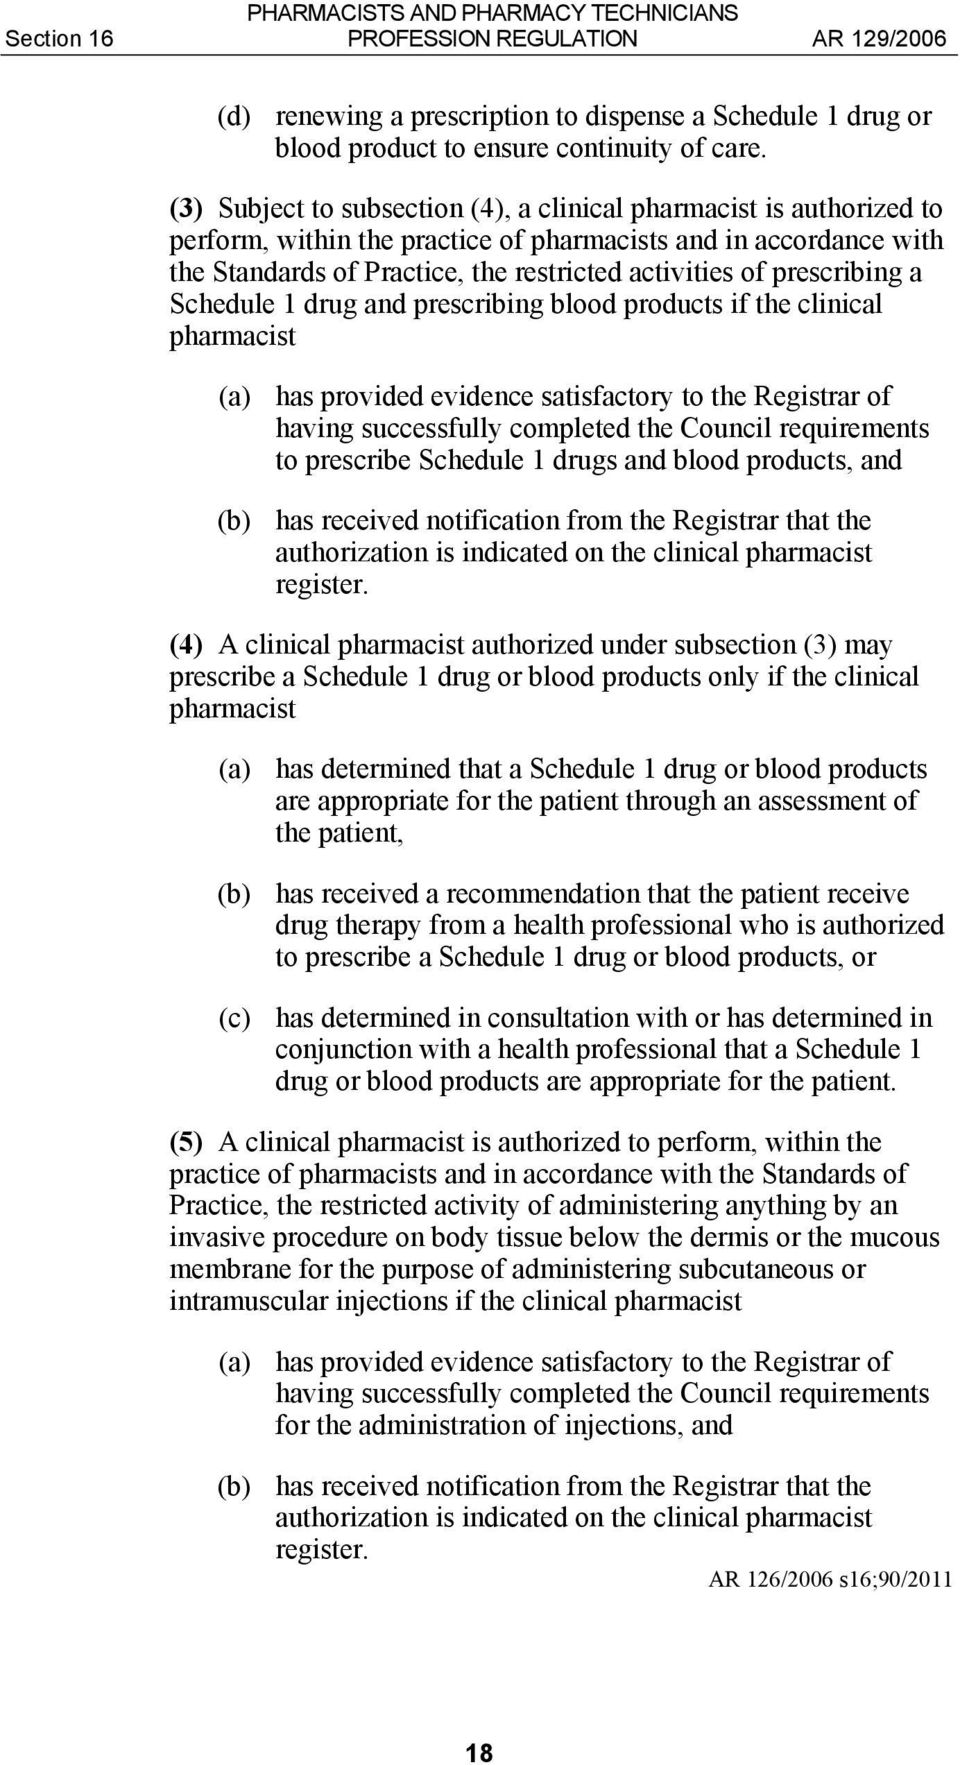 prescribing a Schedule 1 drug and prescribing blood products if the clinical pharmacist (a) has provided evidence satisfactory to the Registrar of having successfully completed the Council